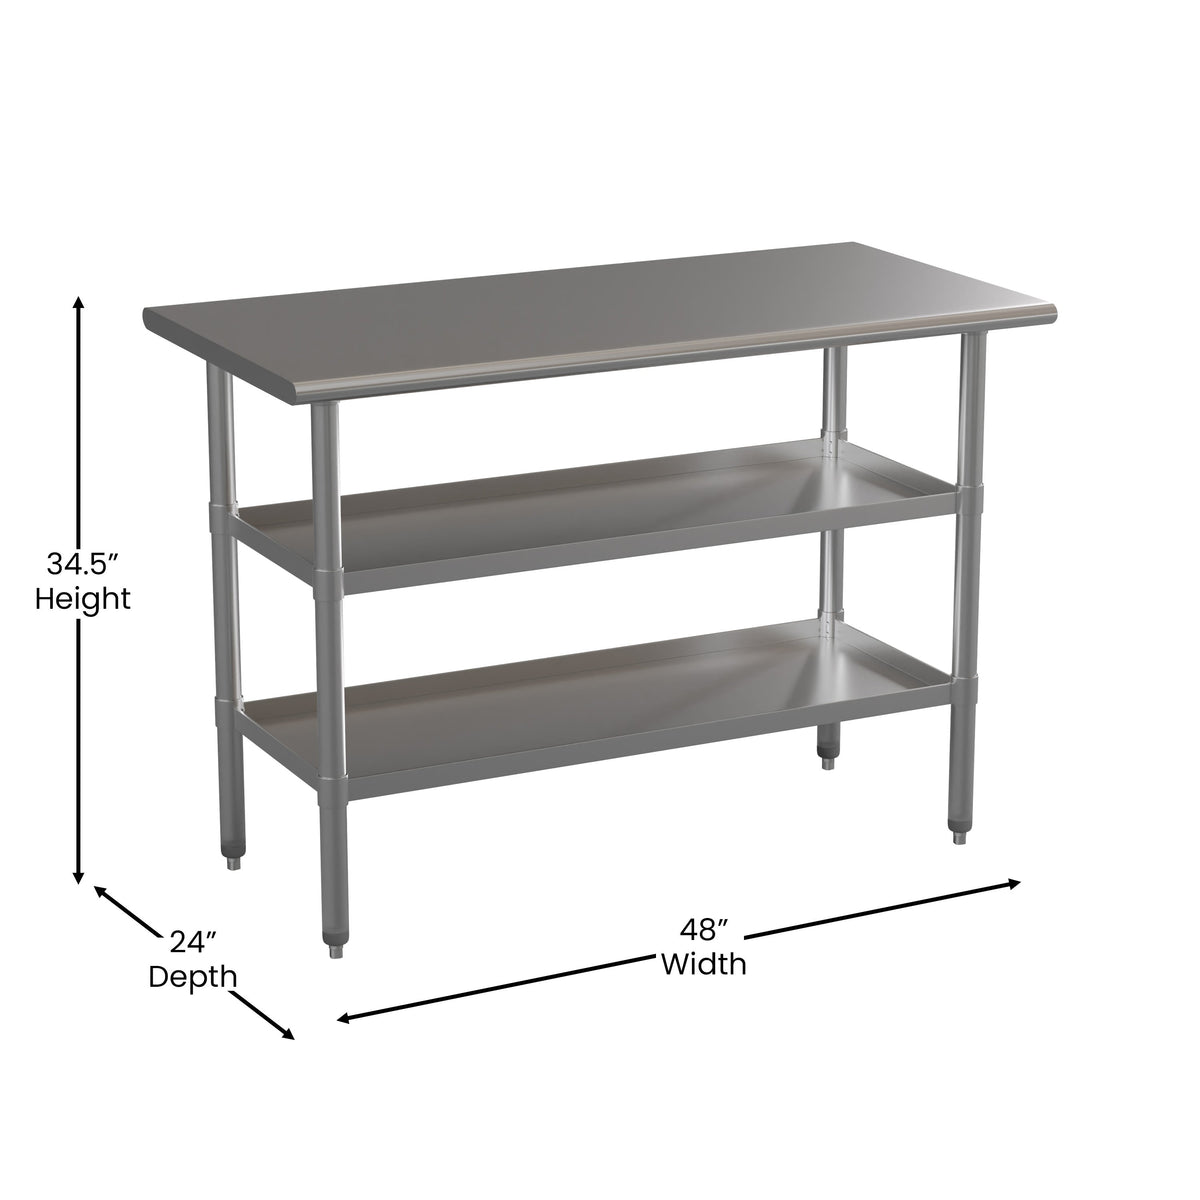 48"W x 24"D |#| 48"W x 24"D NSF Stainless Steel 18 Gauge Work Table with 2 Undershelves